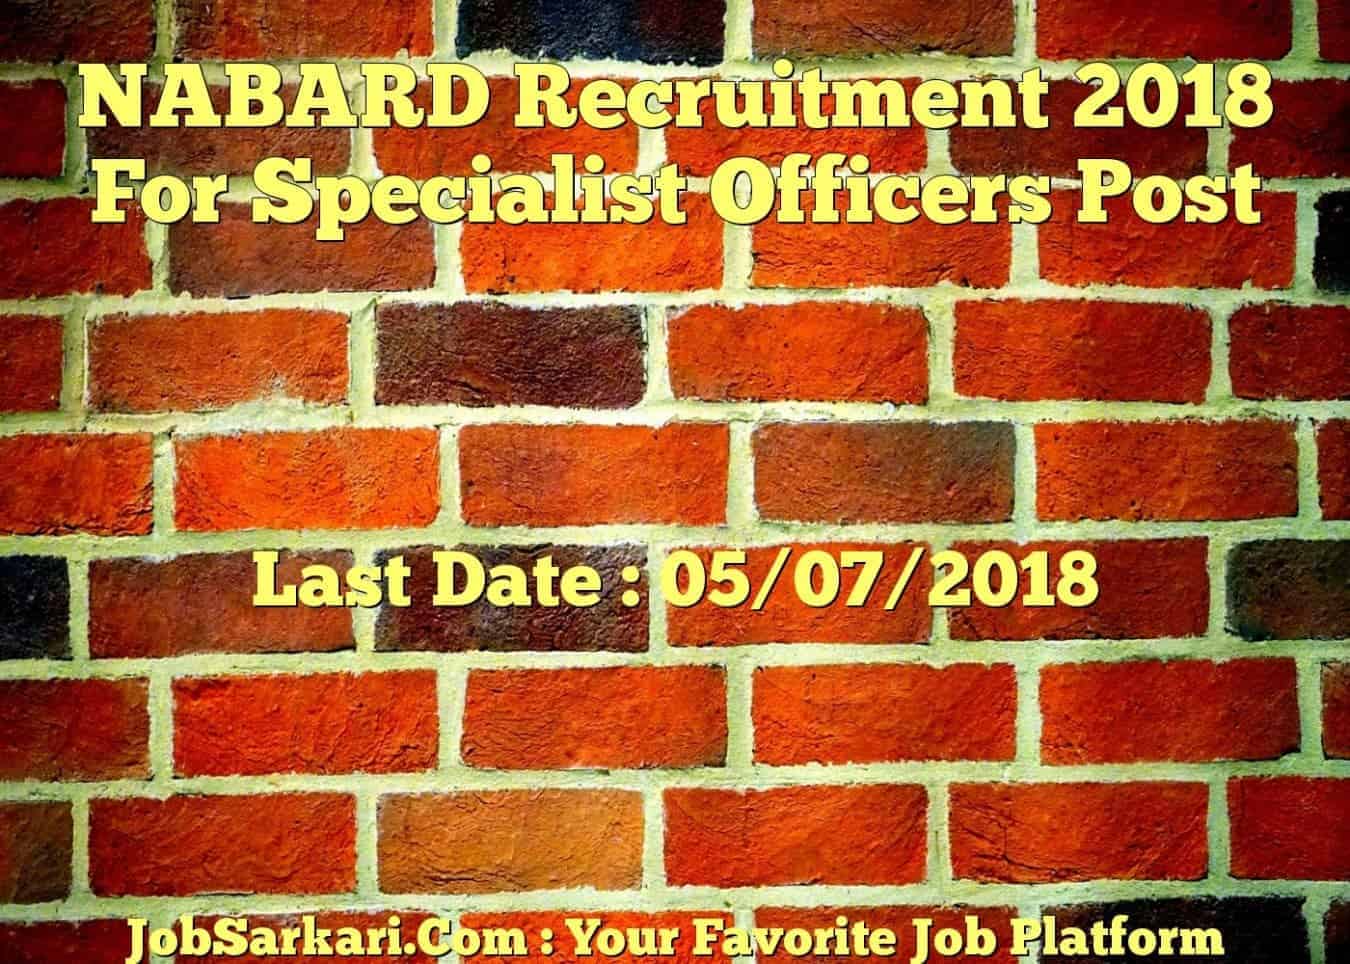 NABARD Recruitment 2018 For Specialist Officers Post